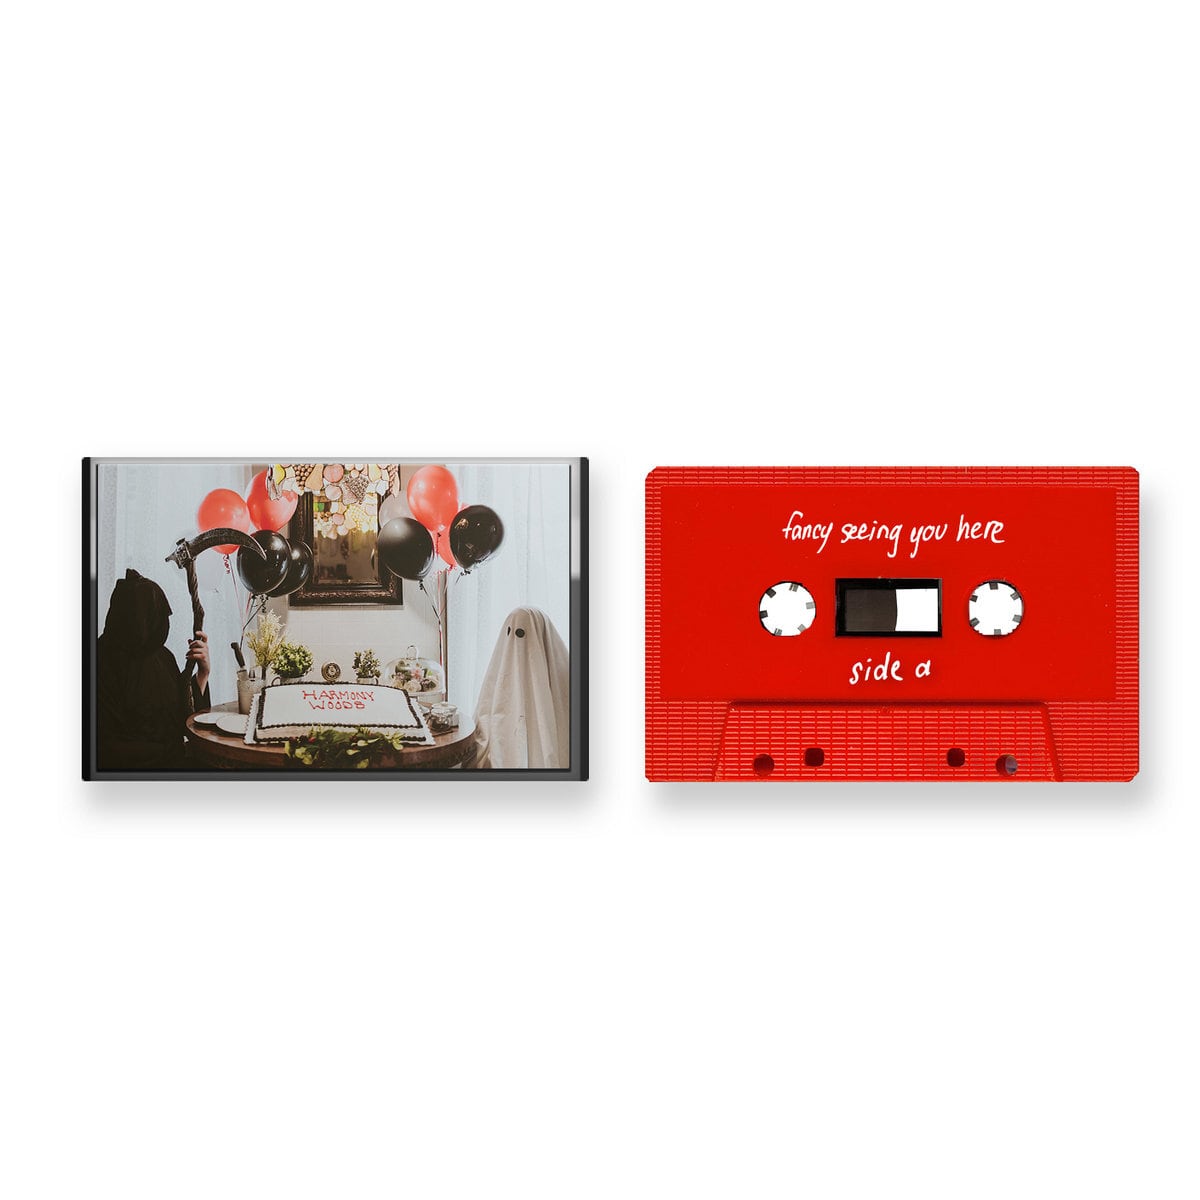 Harmony Woods / Make Yourself At Home（50 Ltd Cassette）